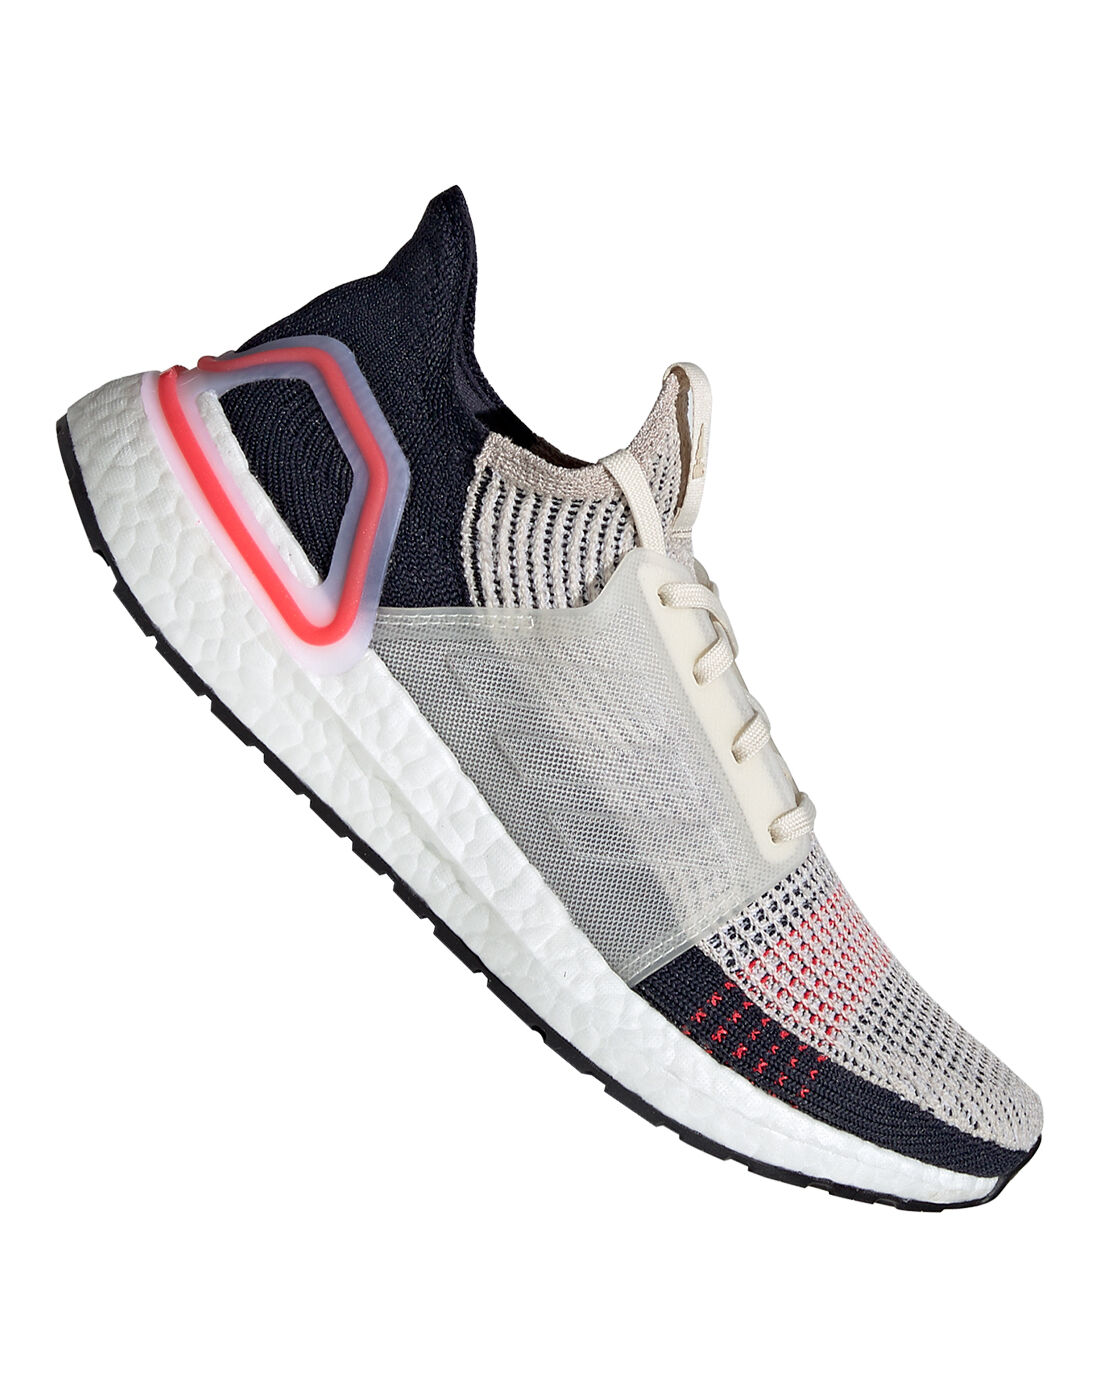 adidas ultra boost offers